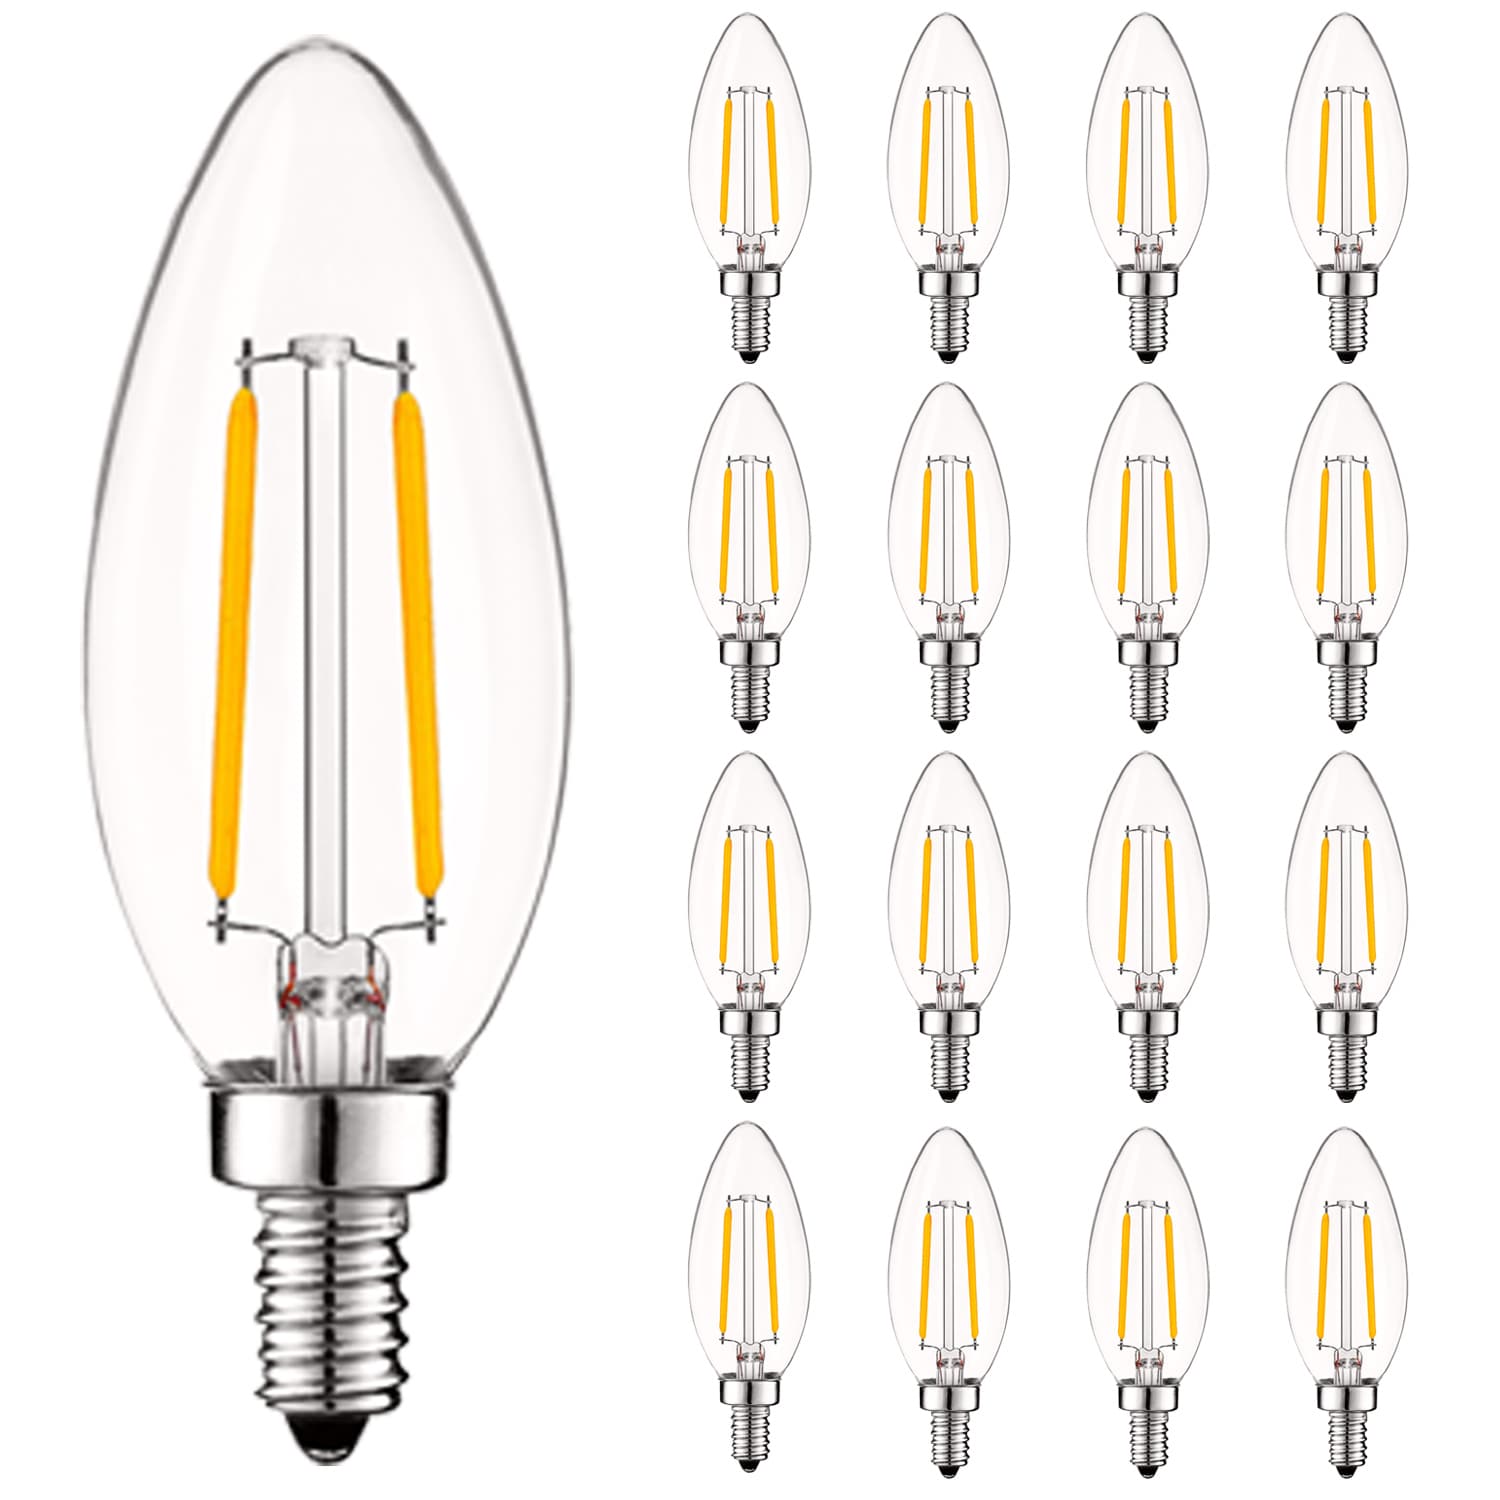 Luxrite 4W Vintage Candelabra LED Bulbs Dimmable, 400 Lumens, 40W Equivalent, Clear Glass, E12 Base (16 Pack) 3000K (Soft White)